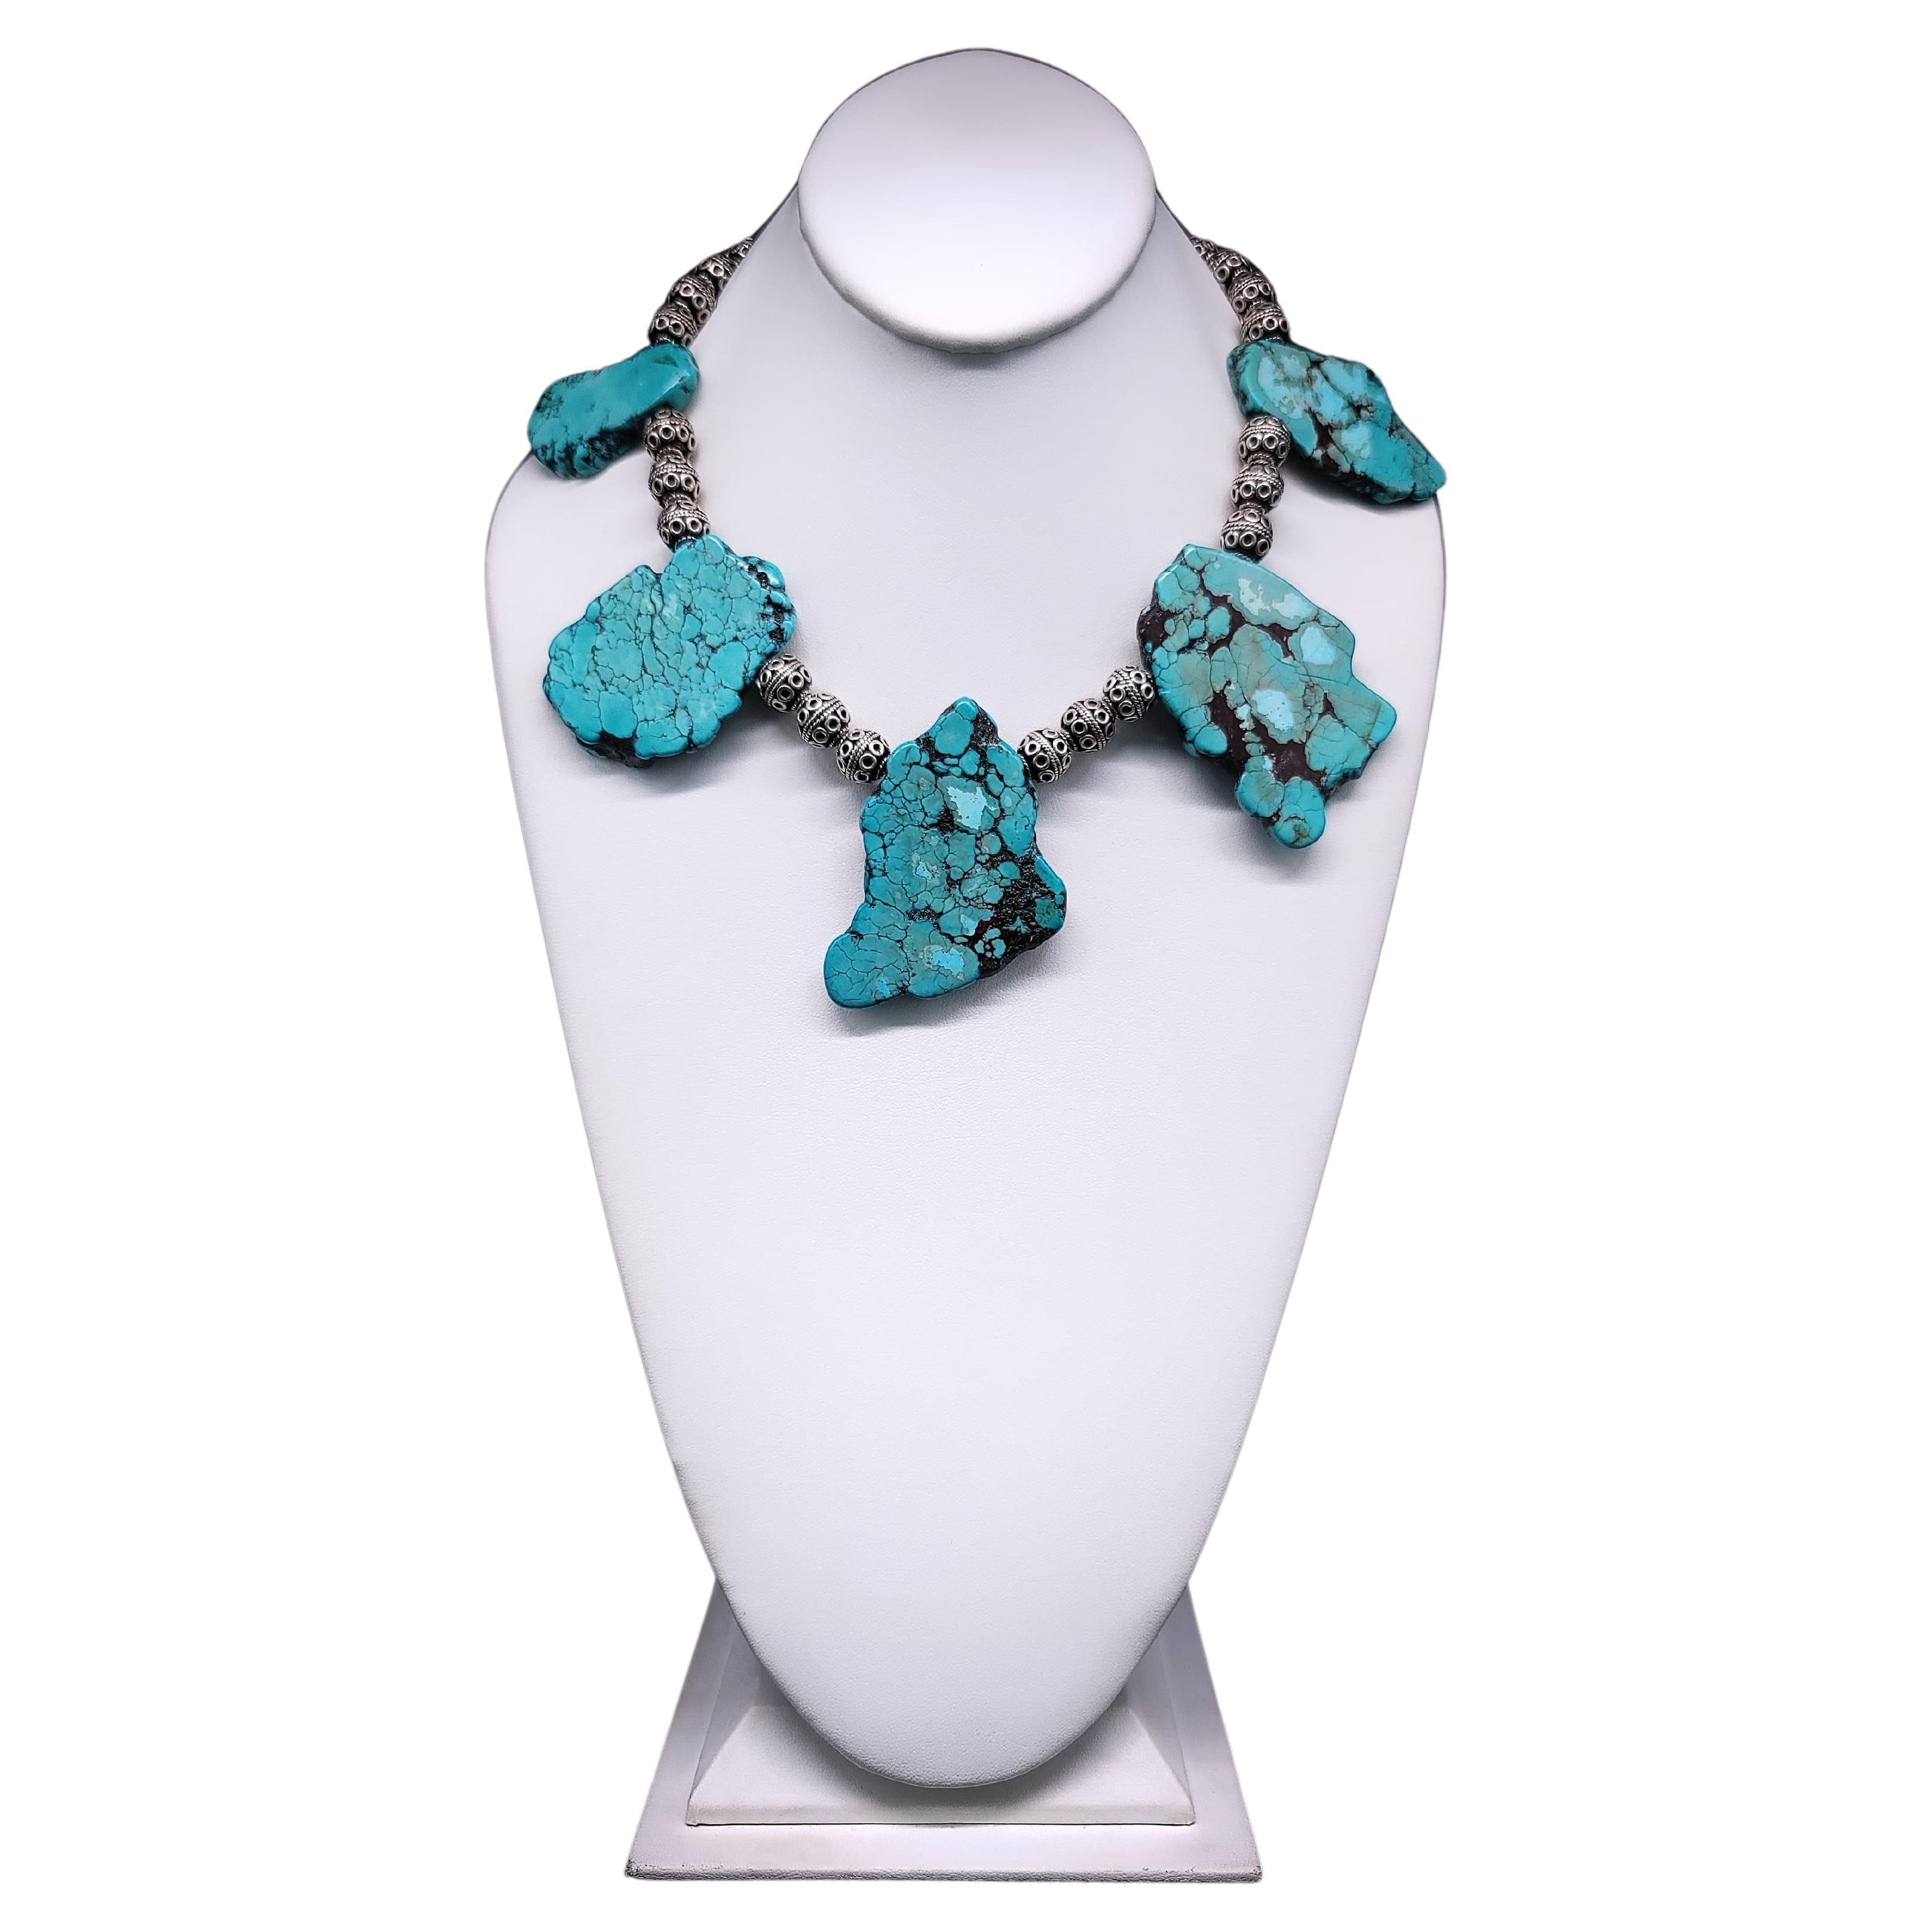 A.Jeschel Massive Turquoise and Sterling Silver Necklace. For Sale